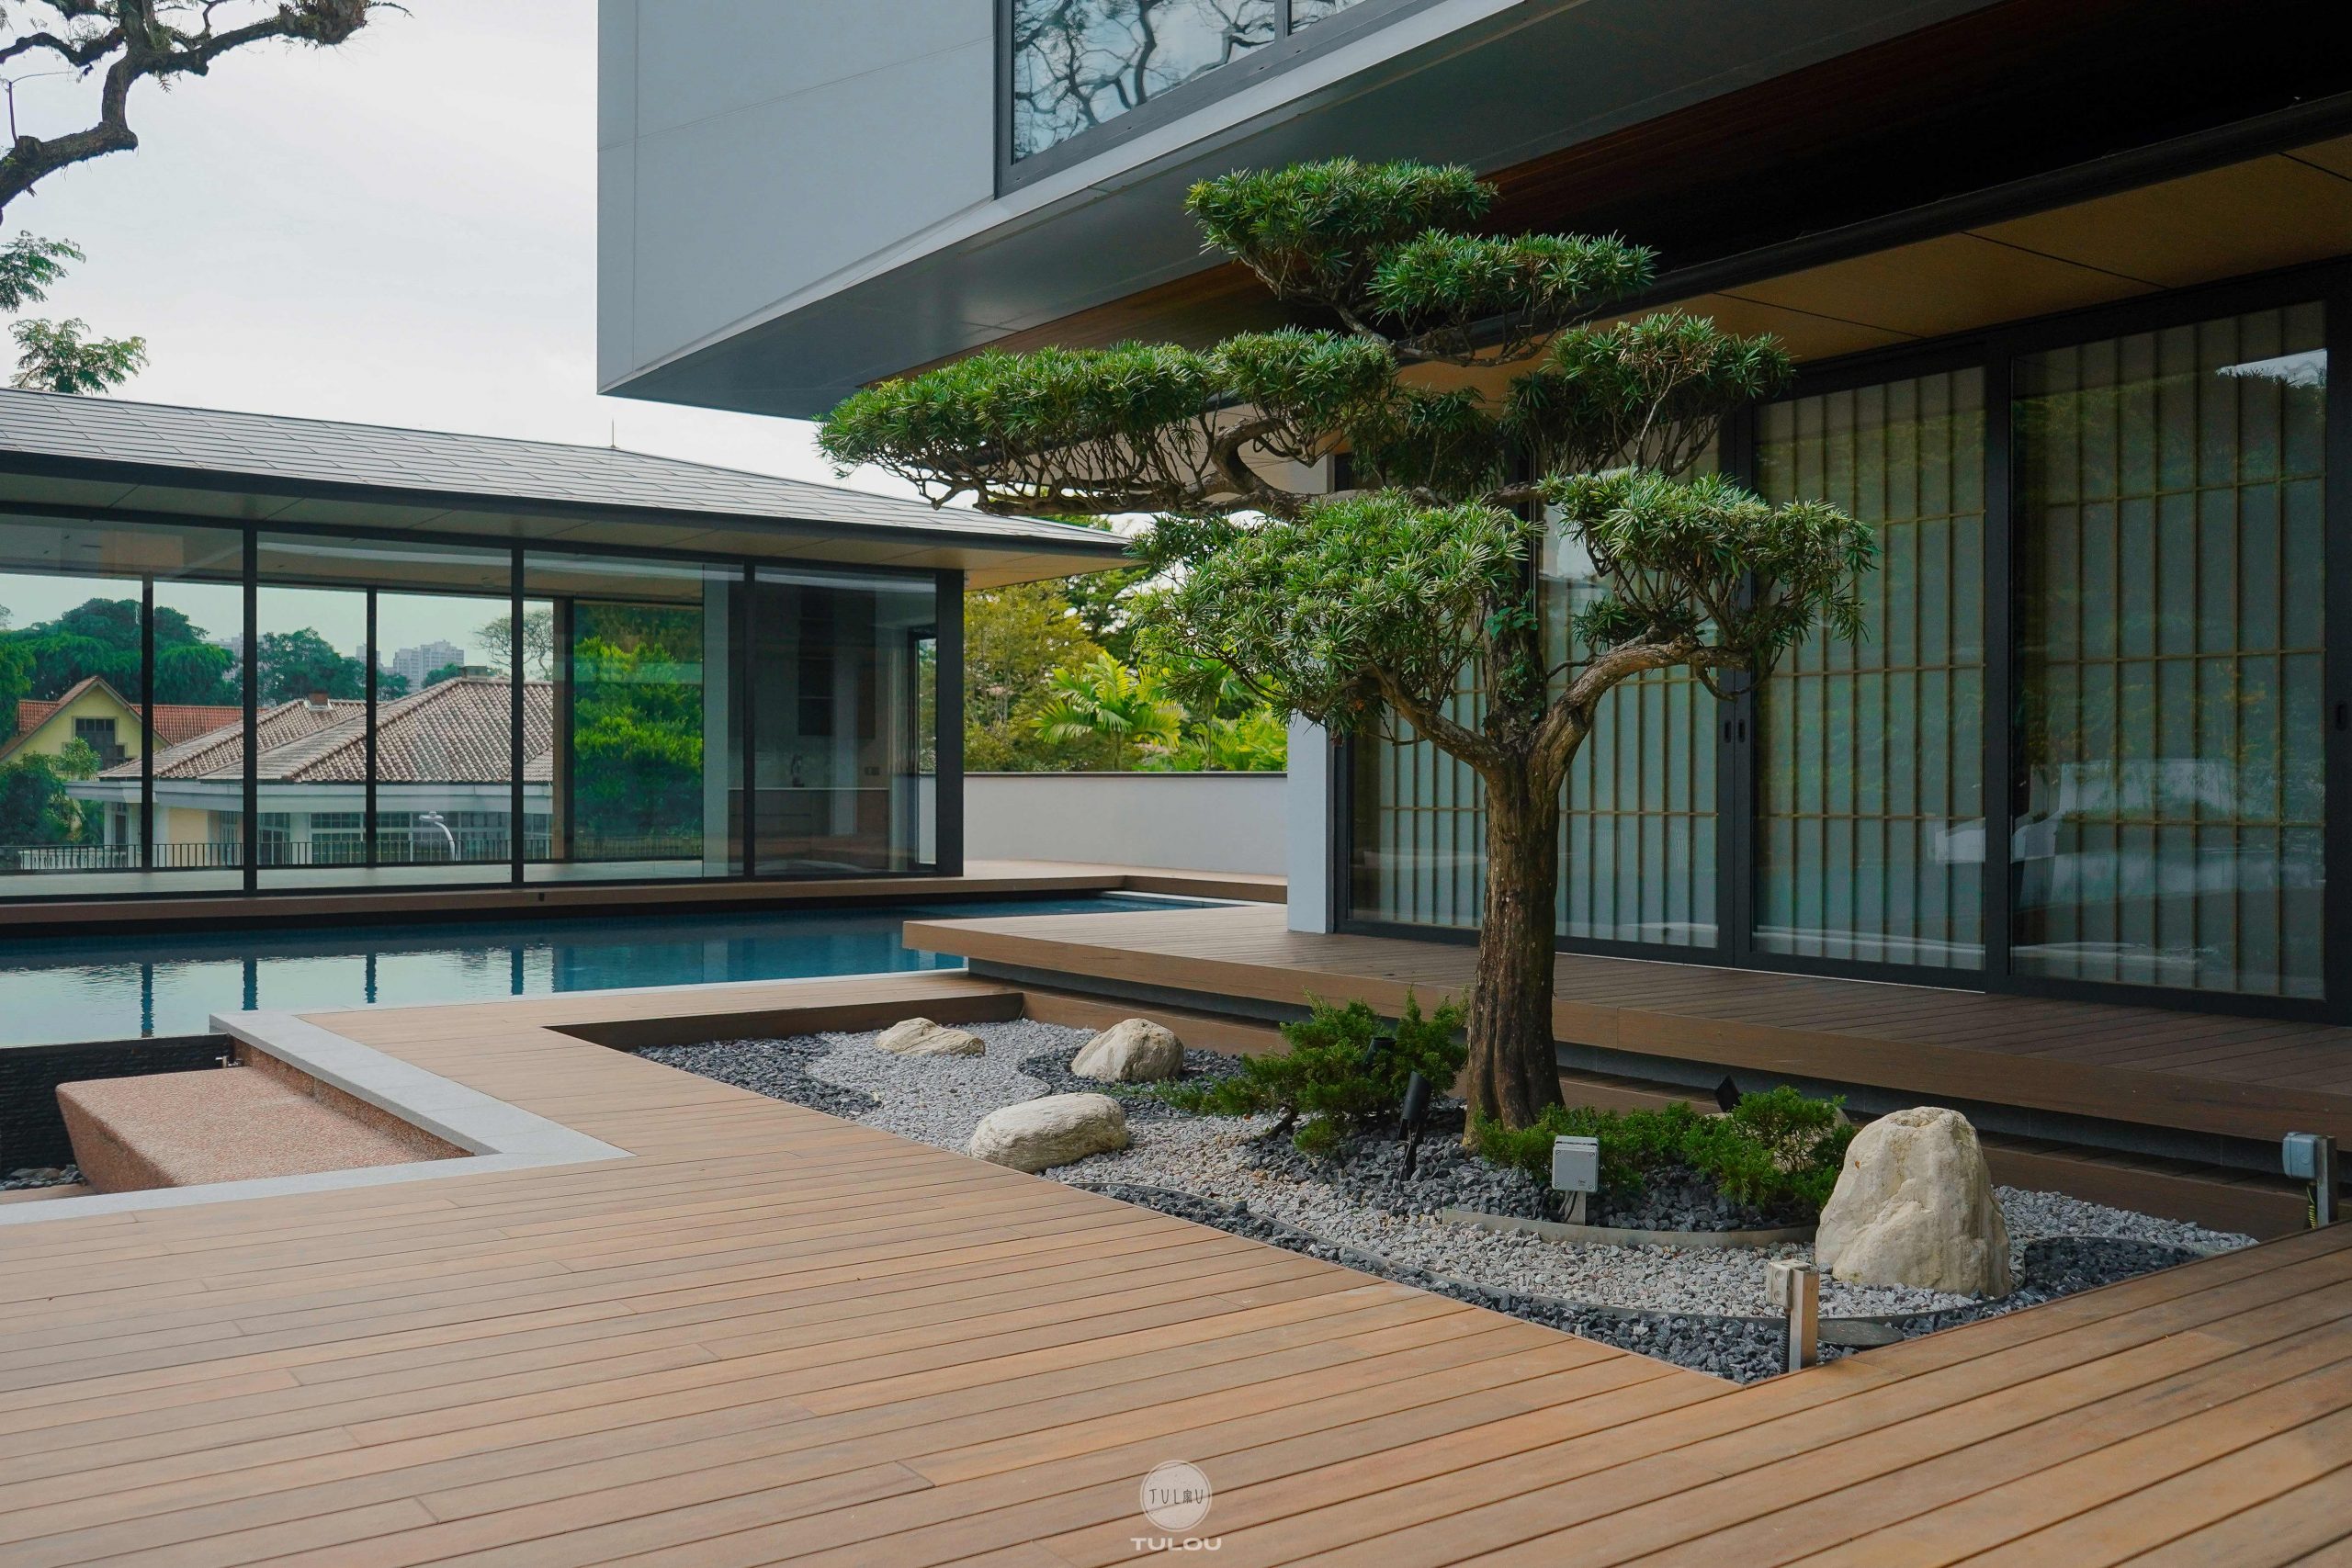 Tulou Composite Timber Decking Singapore 6 scaled - Composite Timber Decking: The Perfect Addition To Your Outdoor Living Space in Singapore